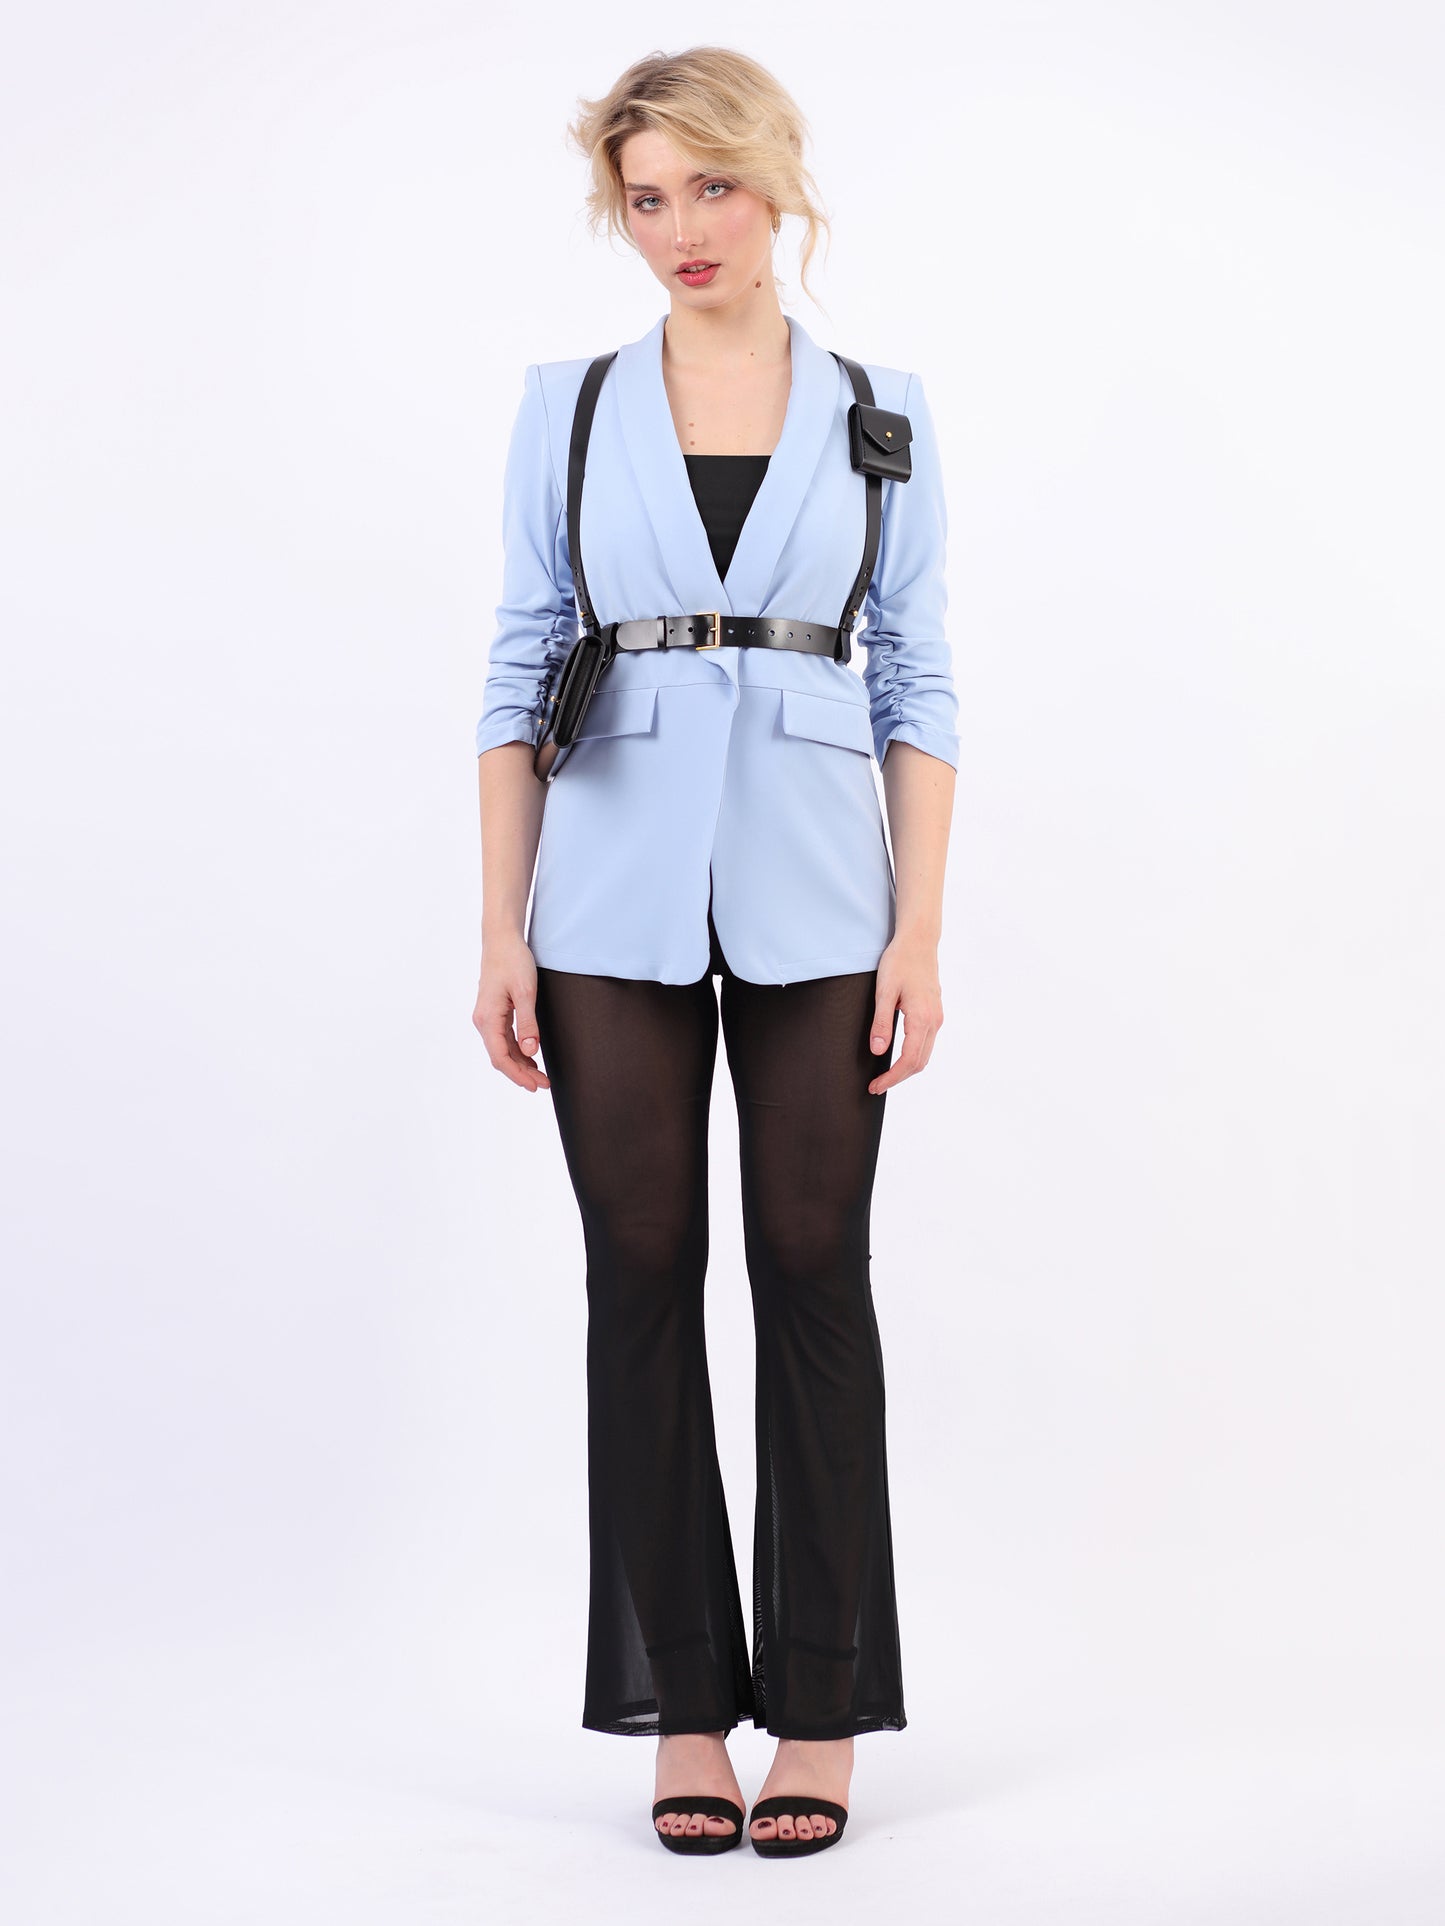 Black double bag harness fitted on woman wearing blue blazer and black trousers.